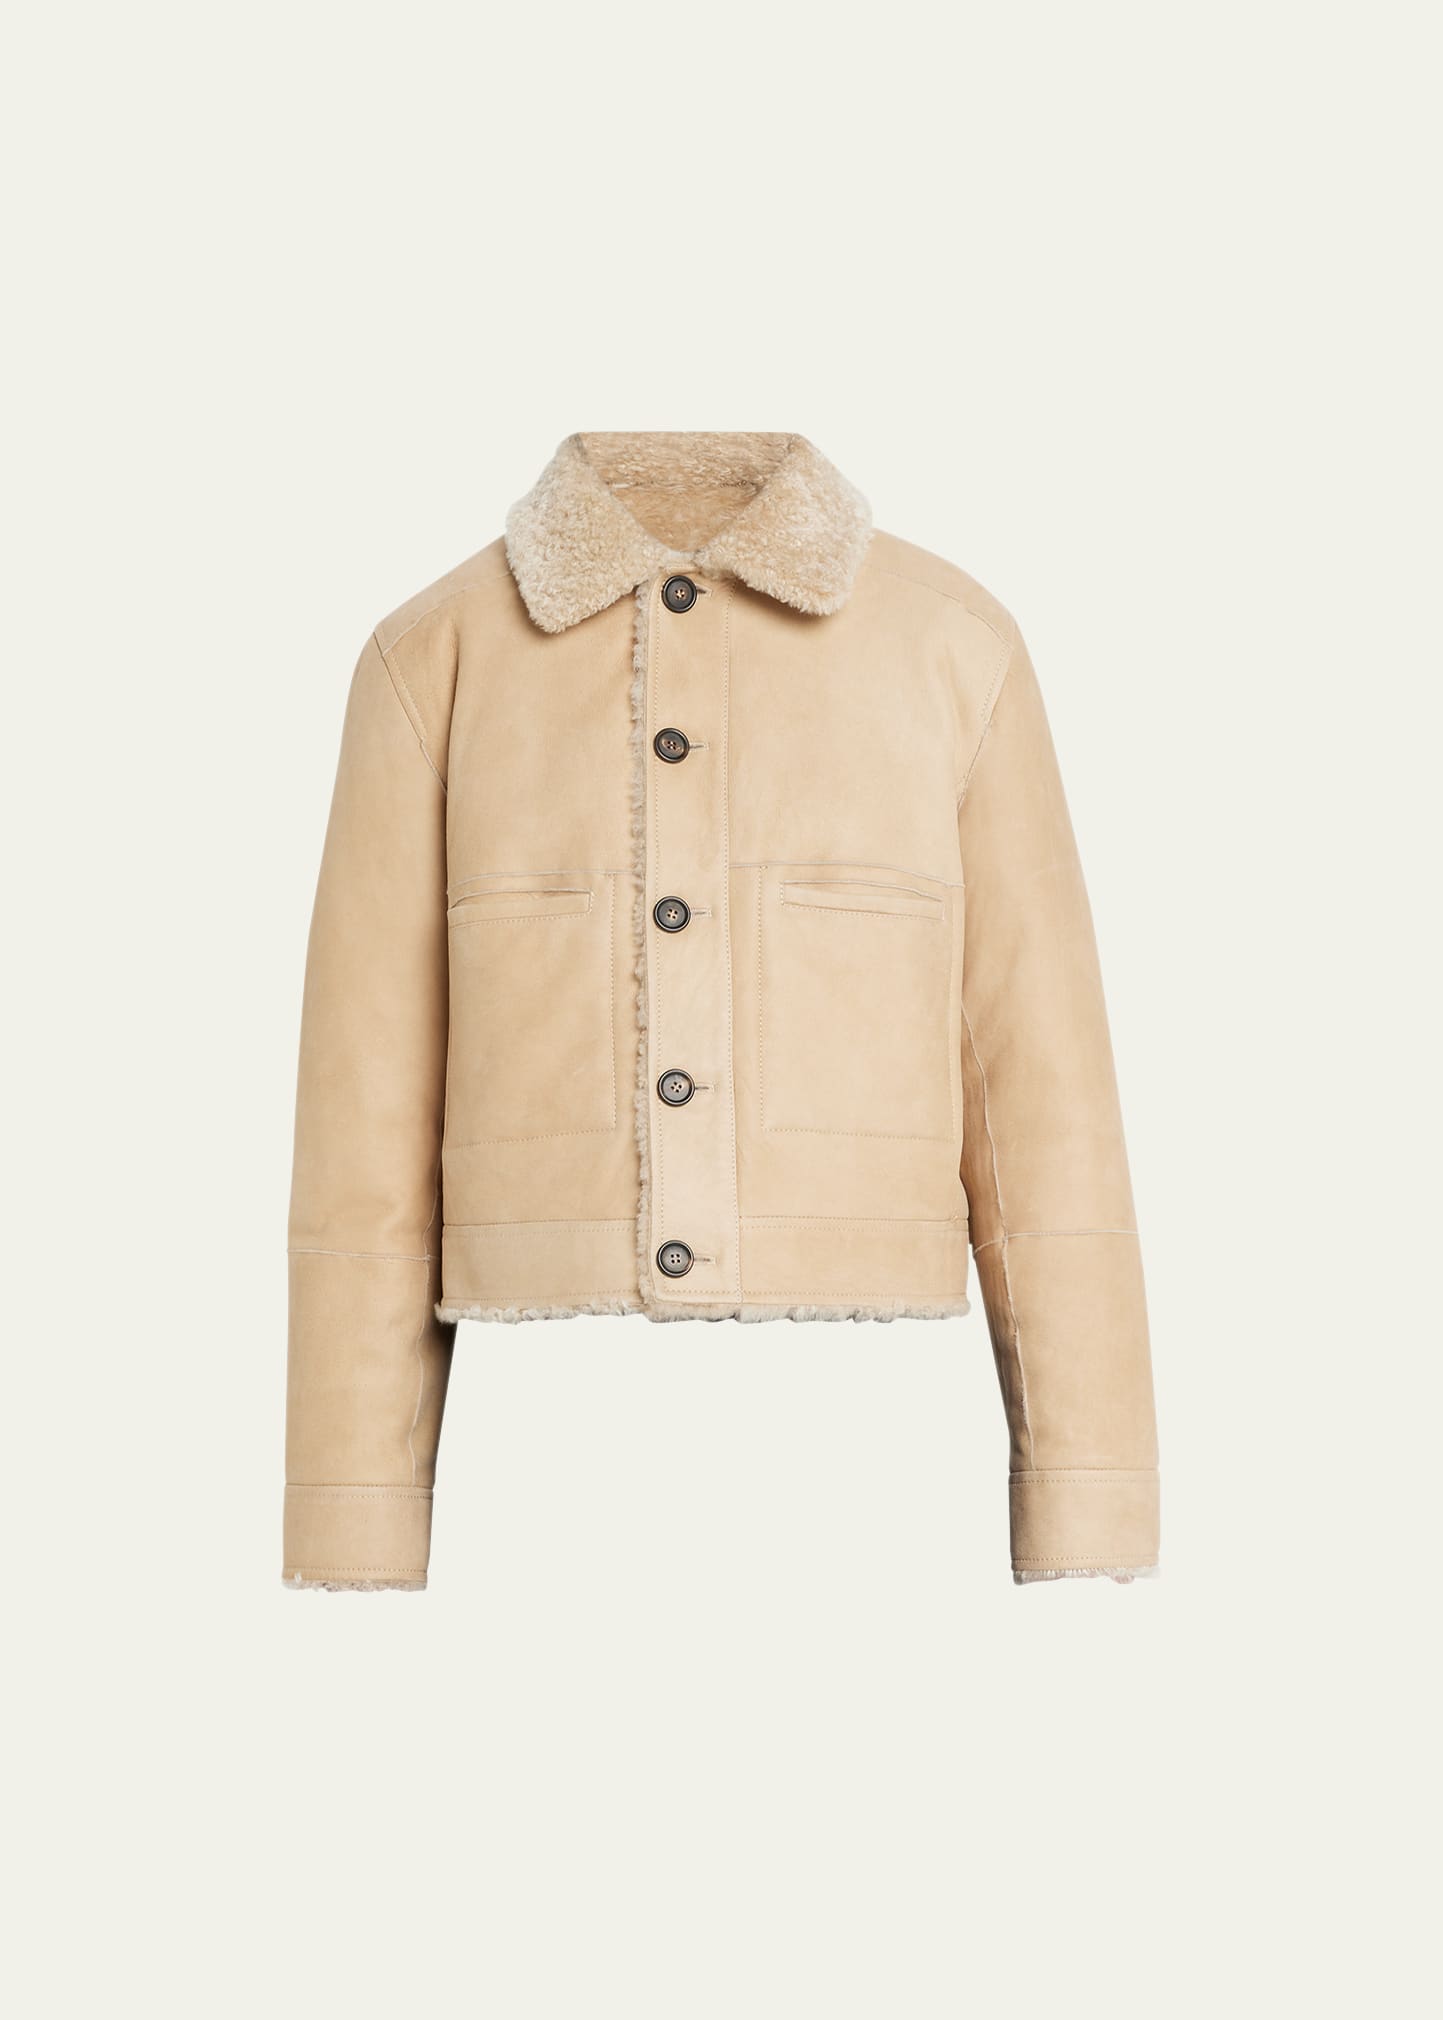 BRUNELLO CUCINELLI SUEDE TO SHEARLING REVERSIBLE SHORT JACKET